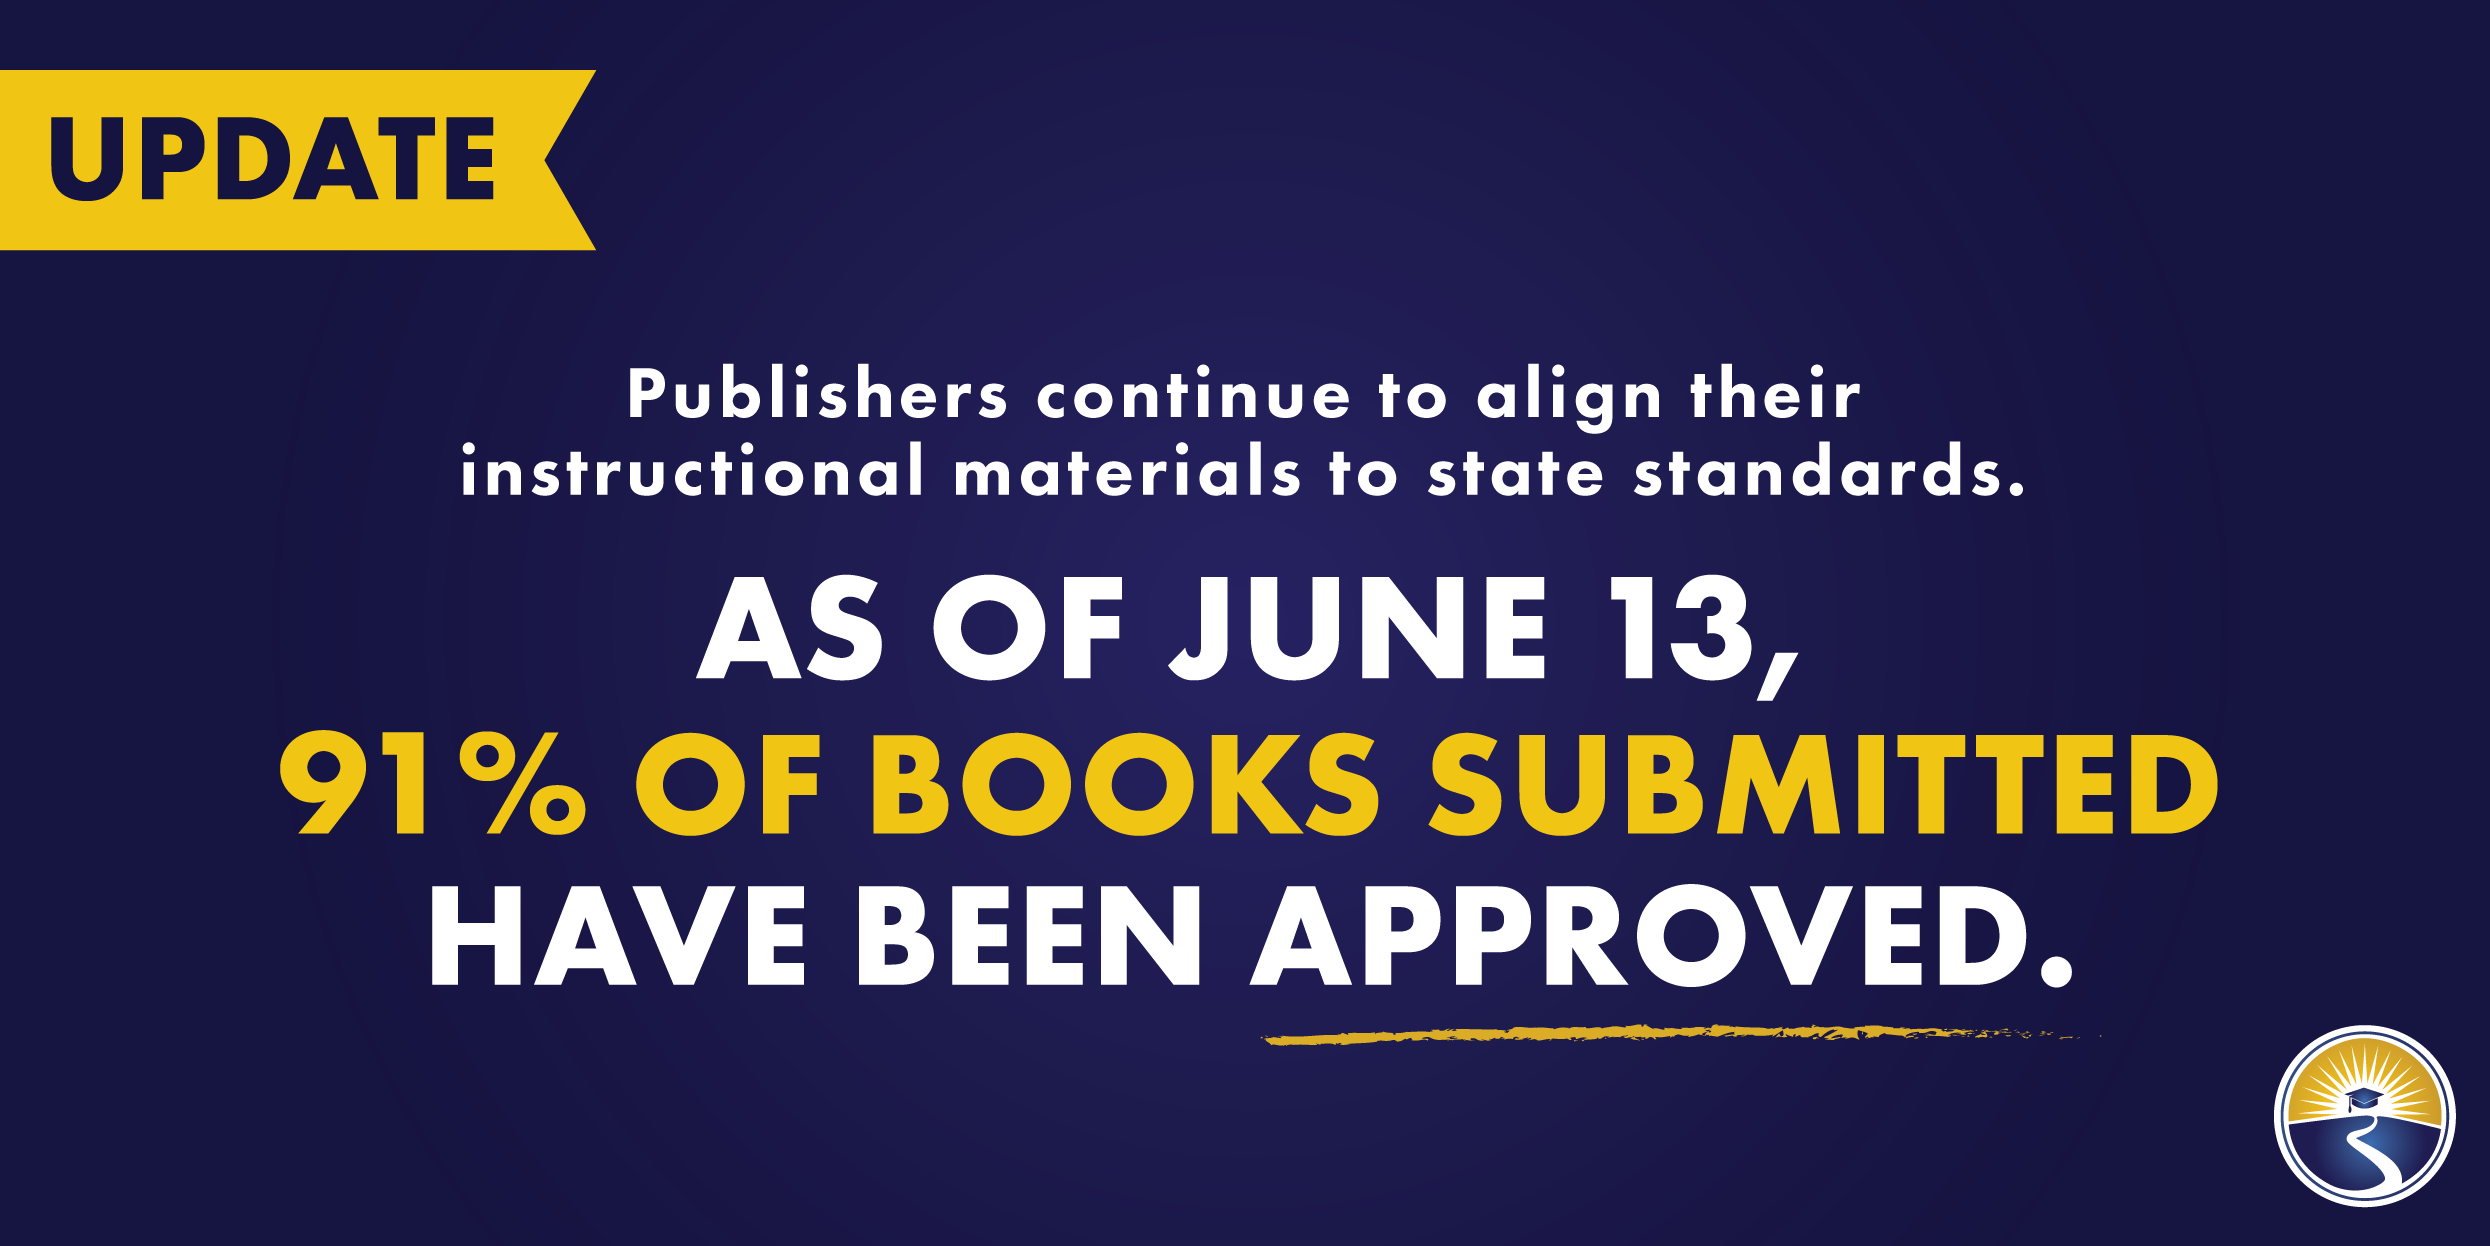 Update! Publishers continue to align their instructional materials to state standard. As of June 13, 91% of books submitted have been approved. 